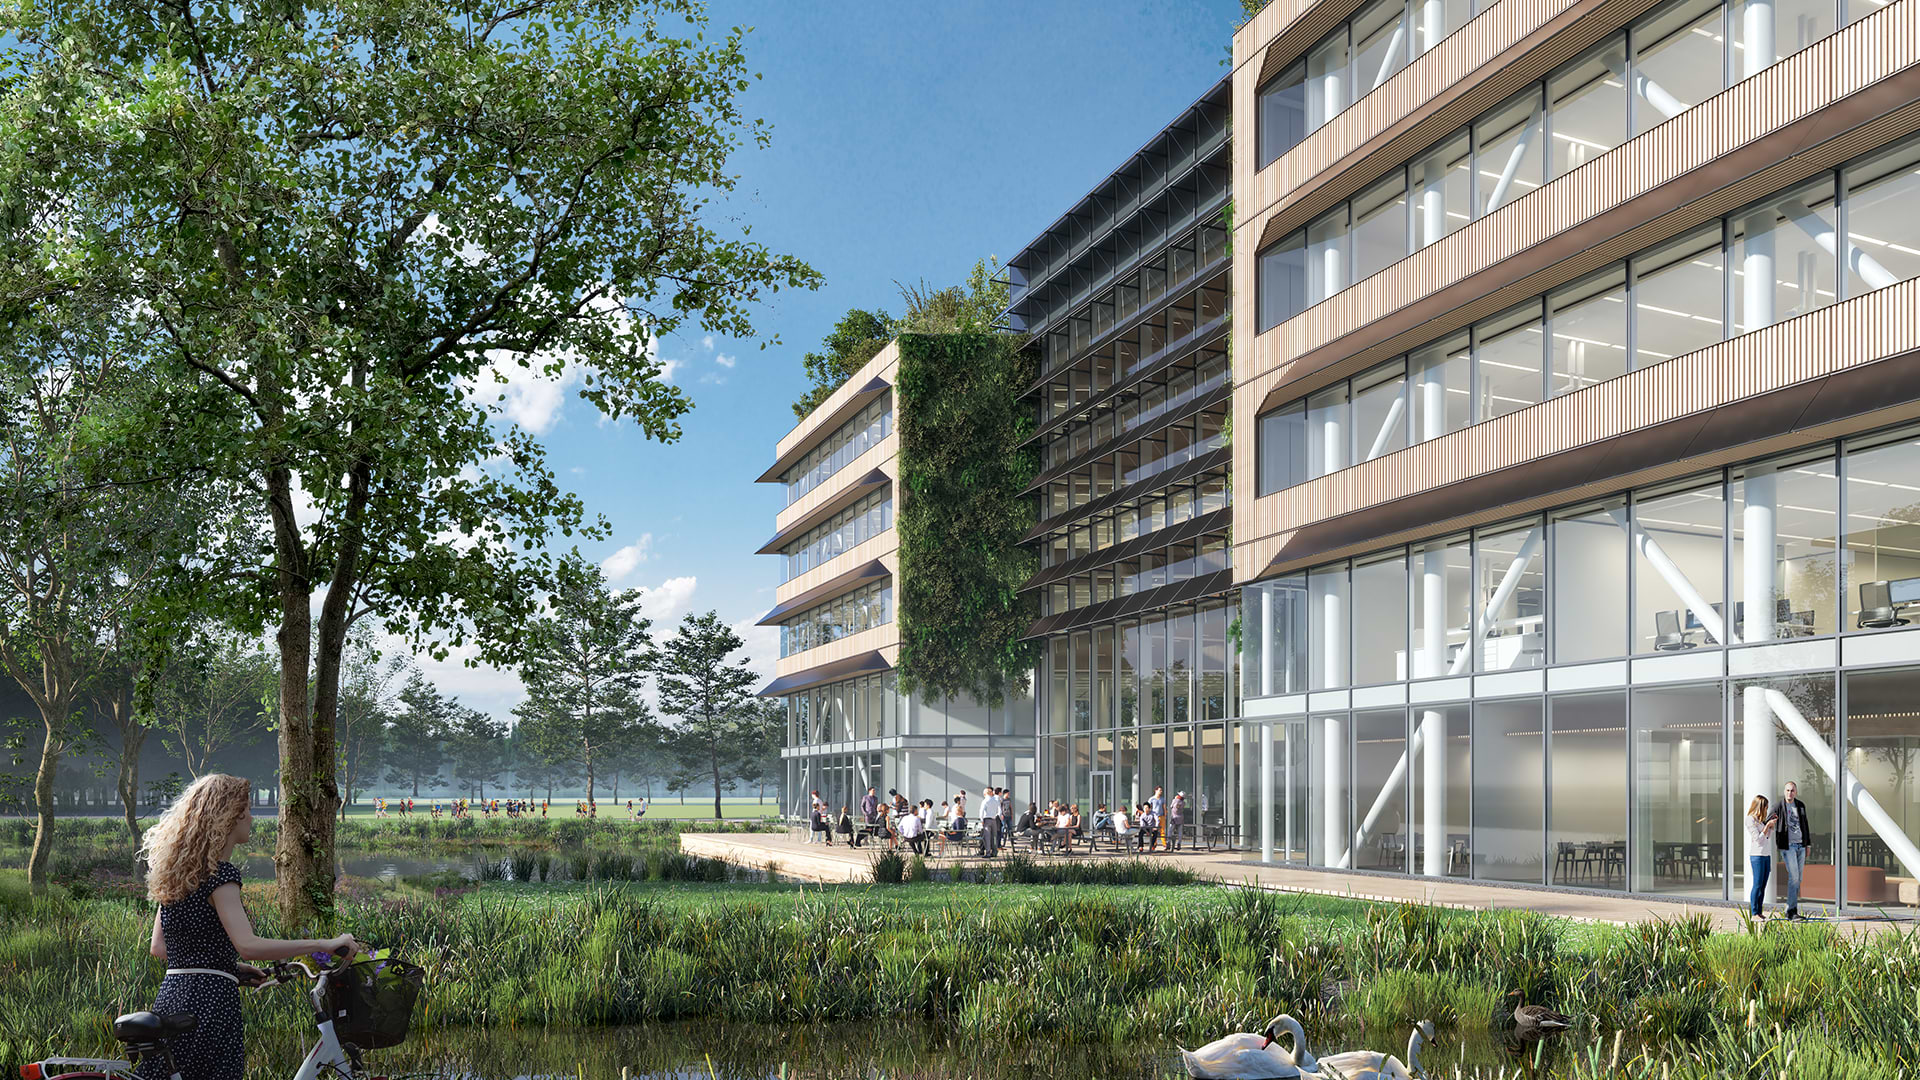 Plus Ultra Utrecht offers companies the opportunity to grow in a prominent location located on the Utrecht Science Park. Plus Ultra Utrecht will be a multi-tenant building where R&D companies in the field of Life Sciences and health will have space to innovate and grow. The new building will be an inspiring and lively meeting place in the largest science park in the Netherlands. Plus Ultra Utrecht will be completed in June 2025. The name ‘Plus Ultra’ fits in perfectly with this. Plus Ultra’ means ‘ever further’ and refers to the drive to keep innovating and improving. Plus Ultra Utrecht will consist of over 22,880 m2 GLA, with space for laboratories and offices. The building will be surrounded by greenery and encourage meetings. As the building’s hub, Plus Ultra Utrecht’s atrium provides access to meeting facilities, the restaurant, the Science Gallery and rentable spaces. Externally, the atrium extends to a terrace to the south. Thus, the atrium provides space for lunch, flexi-working, meeting and celebrating successes. The corridor around the atrium is fixed, but otherwise the floors can be arranged freely. On each floor, both offices and laboratories can be arranged. Kadans Science Partner likes to think along with its clients when it comes to furnishing their office spaces. That is why we offer workshops to guide clients towards an optimal floor layout and include all disciplines (office and labs) in a tailor-made design.